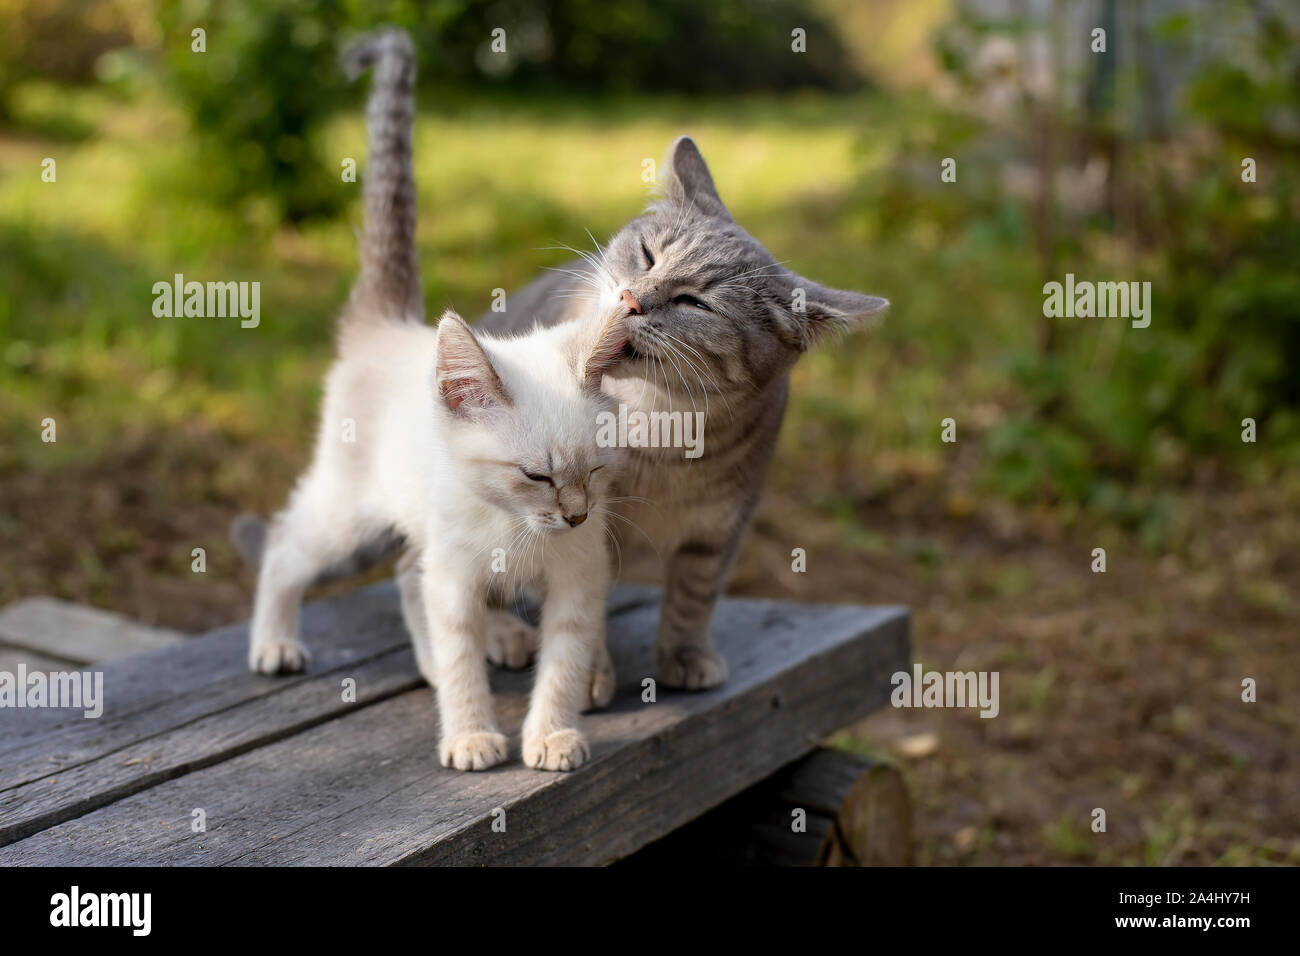 Caring mom cat licking a kitten, in the village, outdoors, on an autumn day. Stock Photo